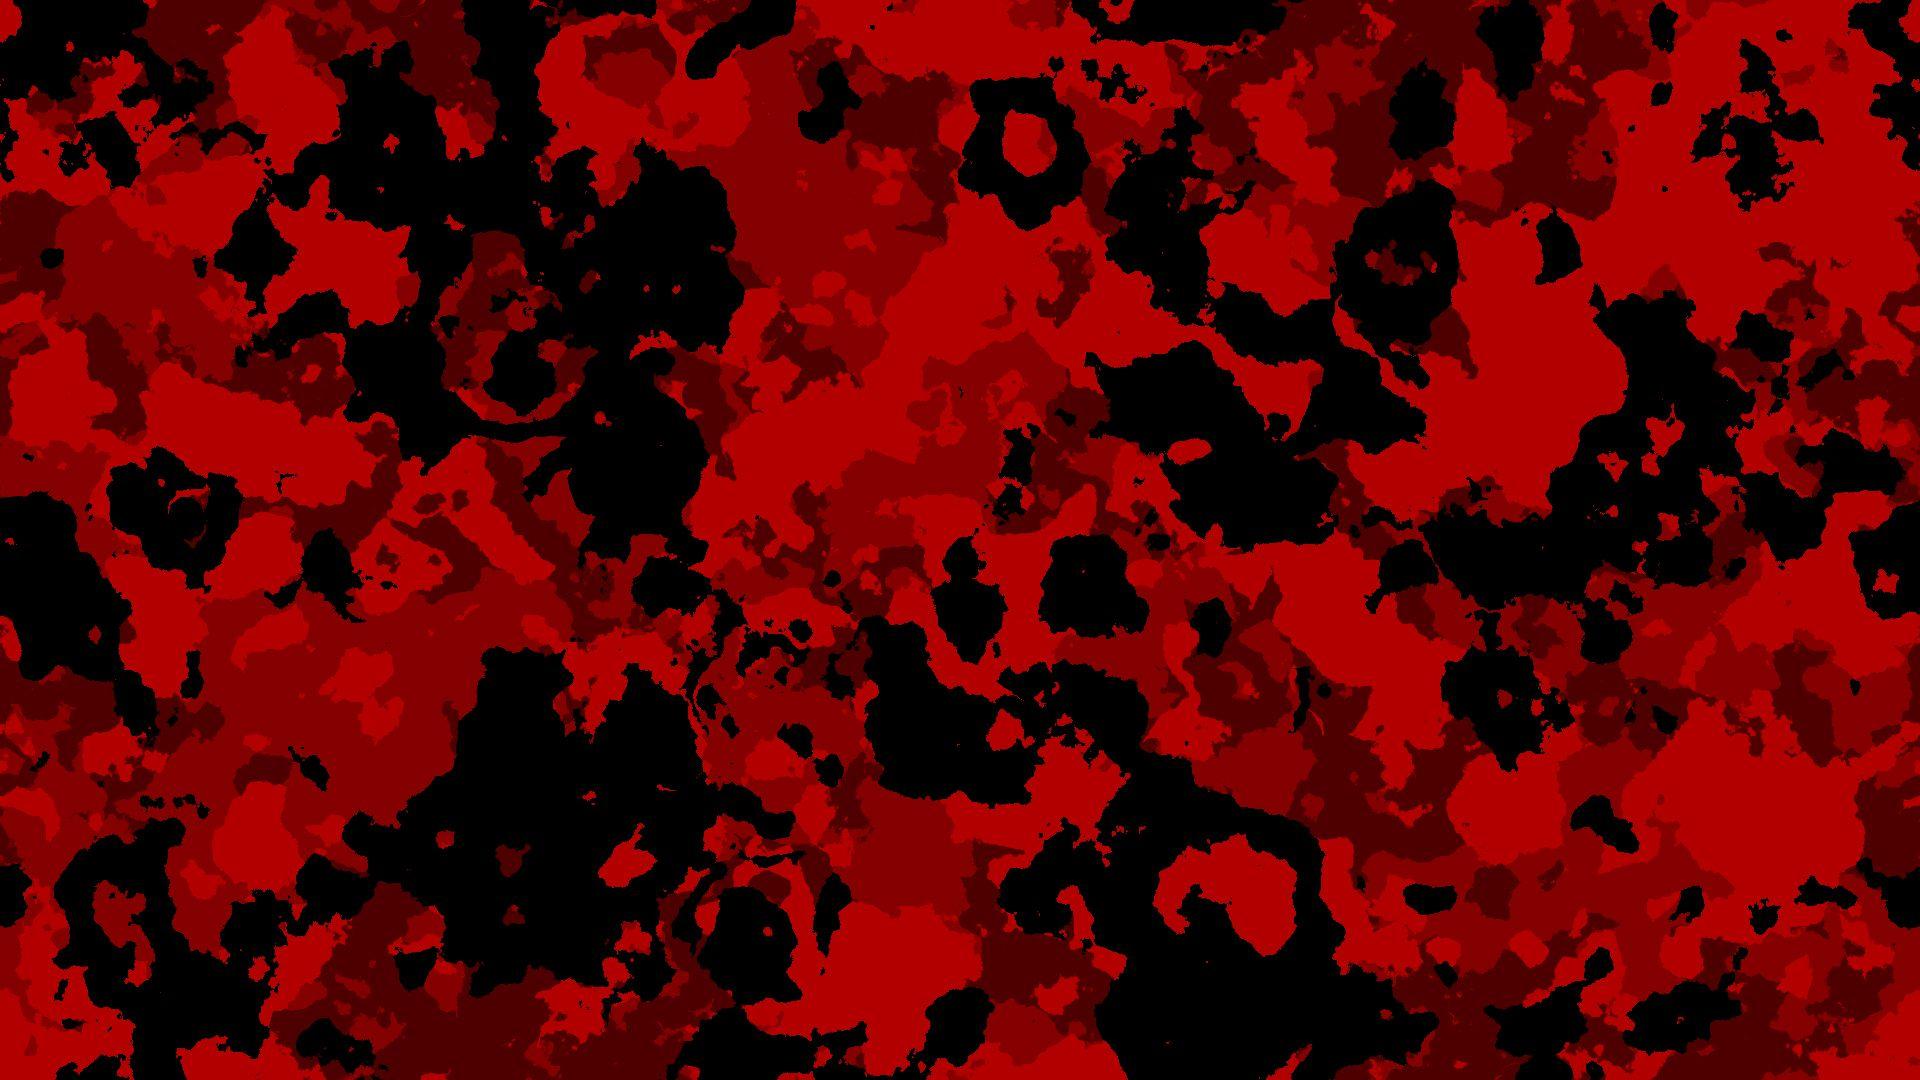 Couldn't find a decent Red Camouflage wallpaper so i made one